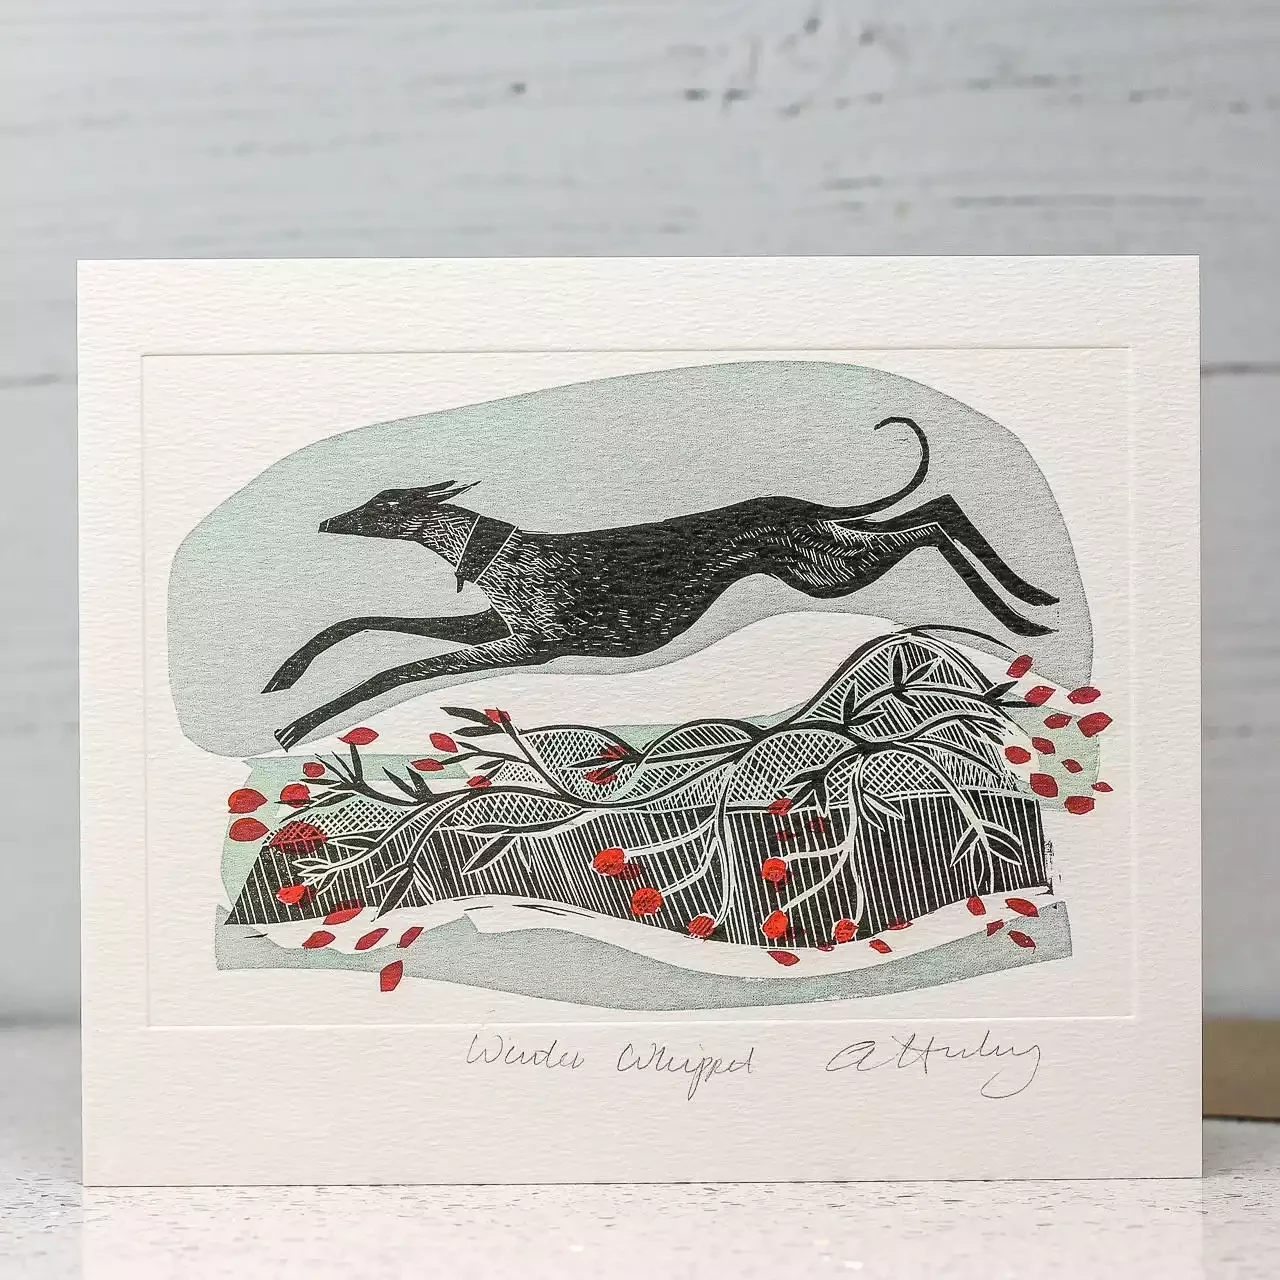 Winter Whippet Card by Angela Harding